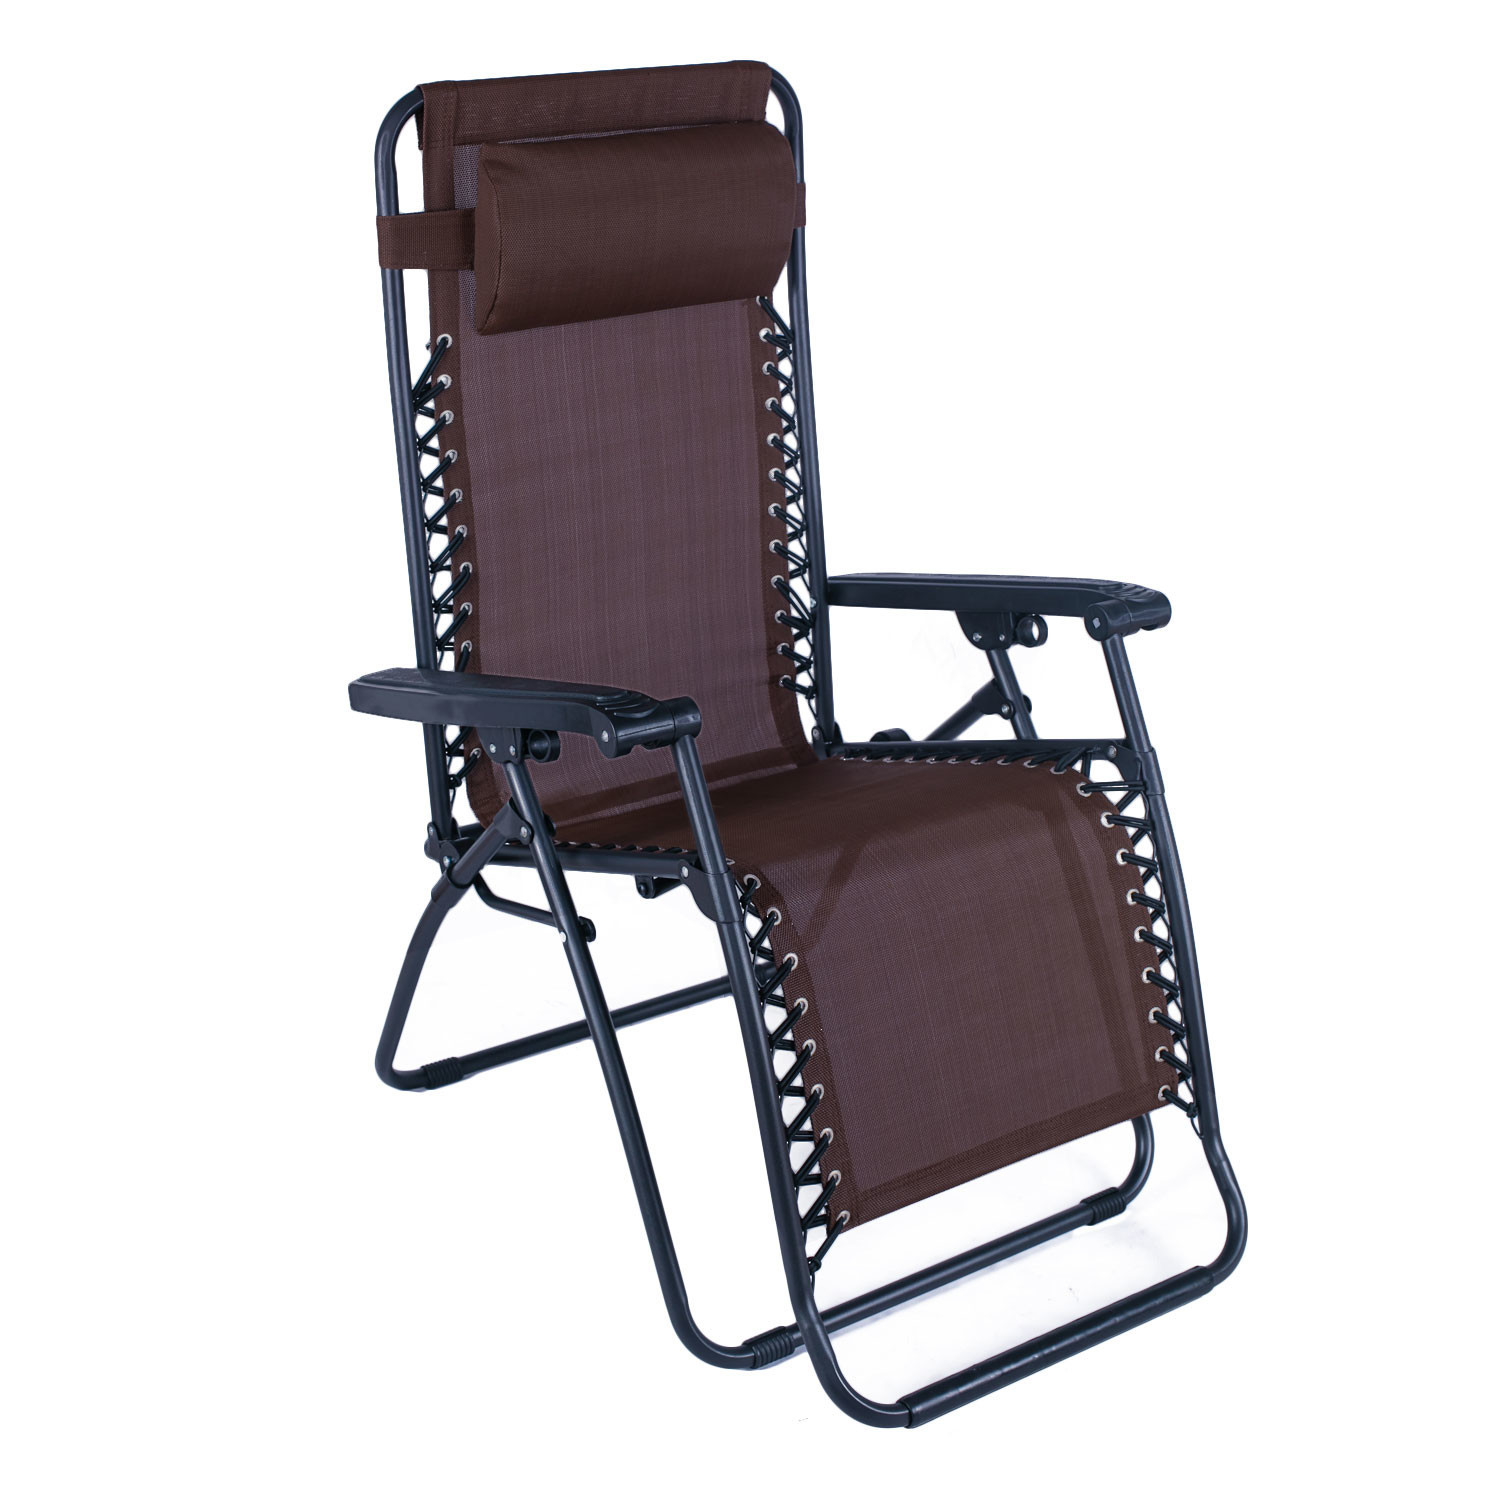 The Best Ideas for Reclining Lawn Chair - Best Collections Ever | Home